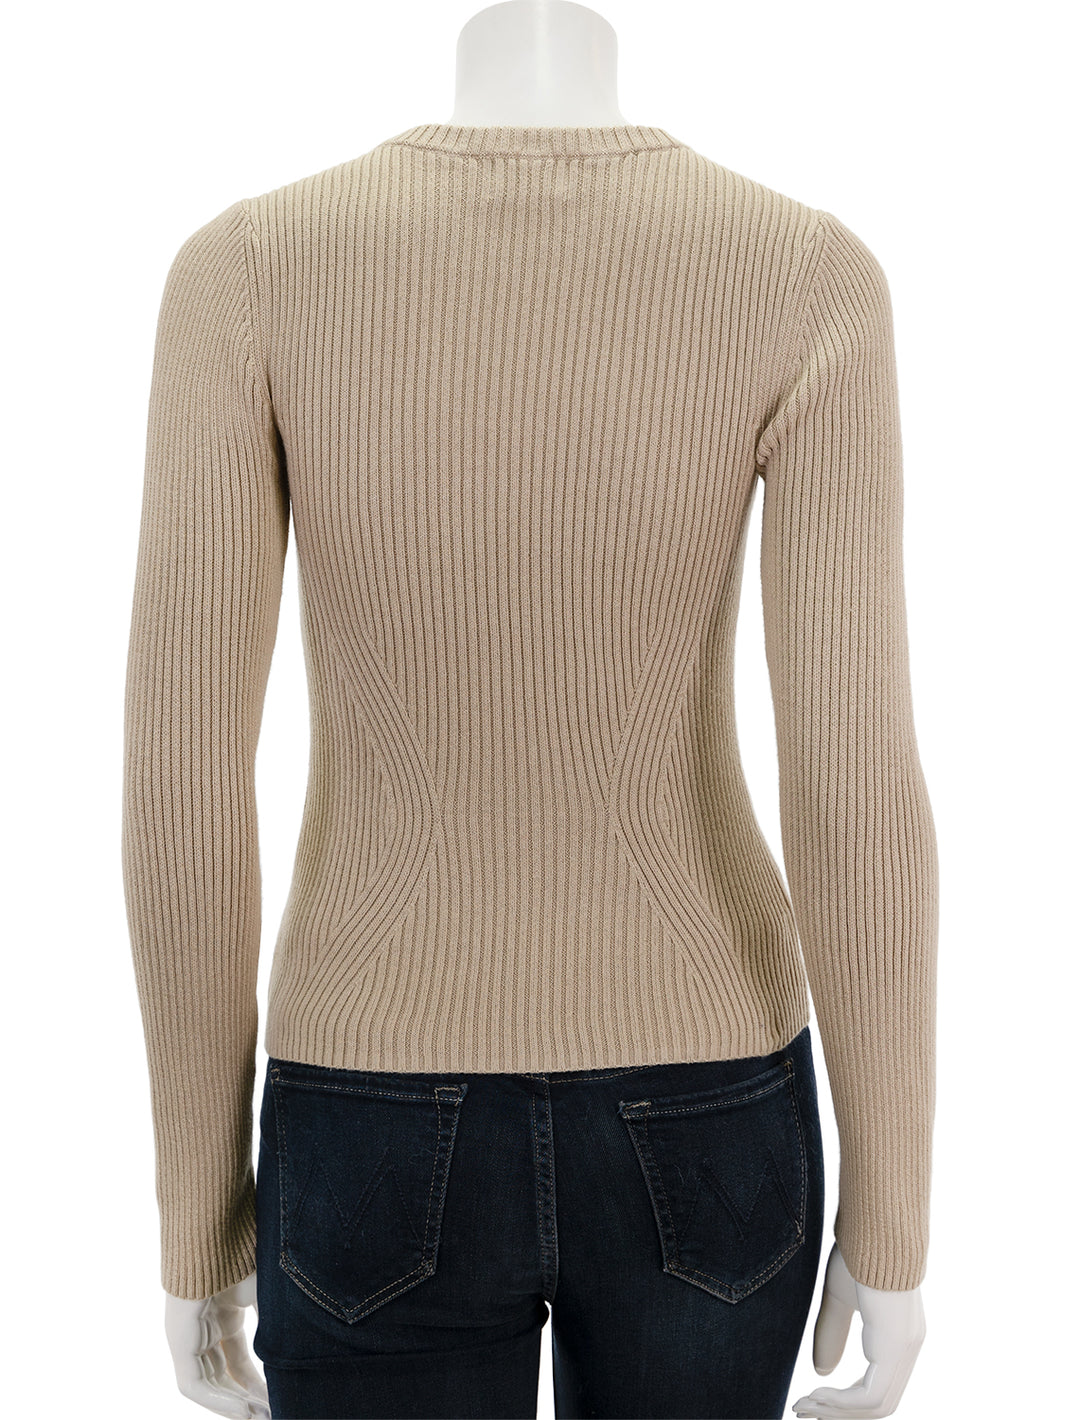 Back view of Nation LTD's lara ribbed sweater in paper bag.